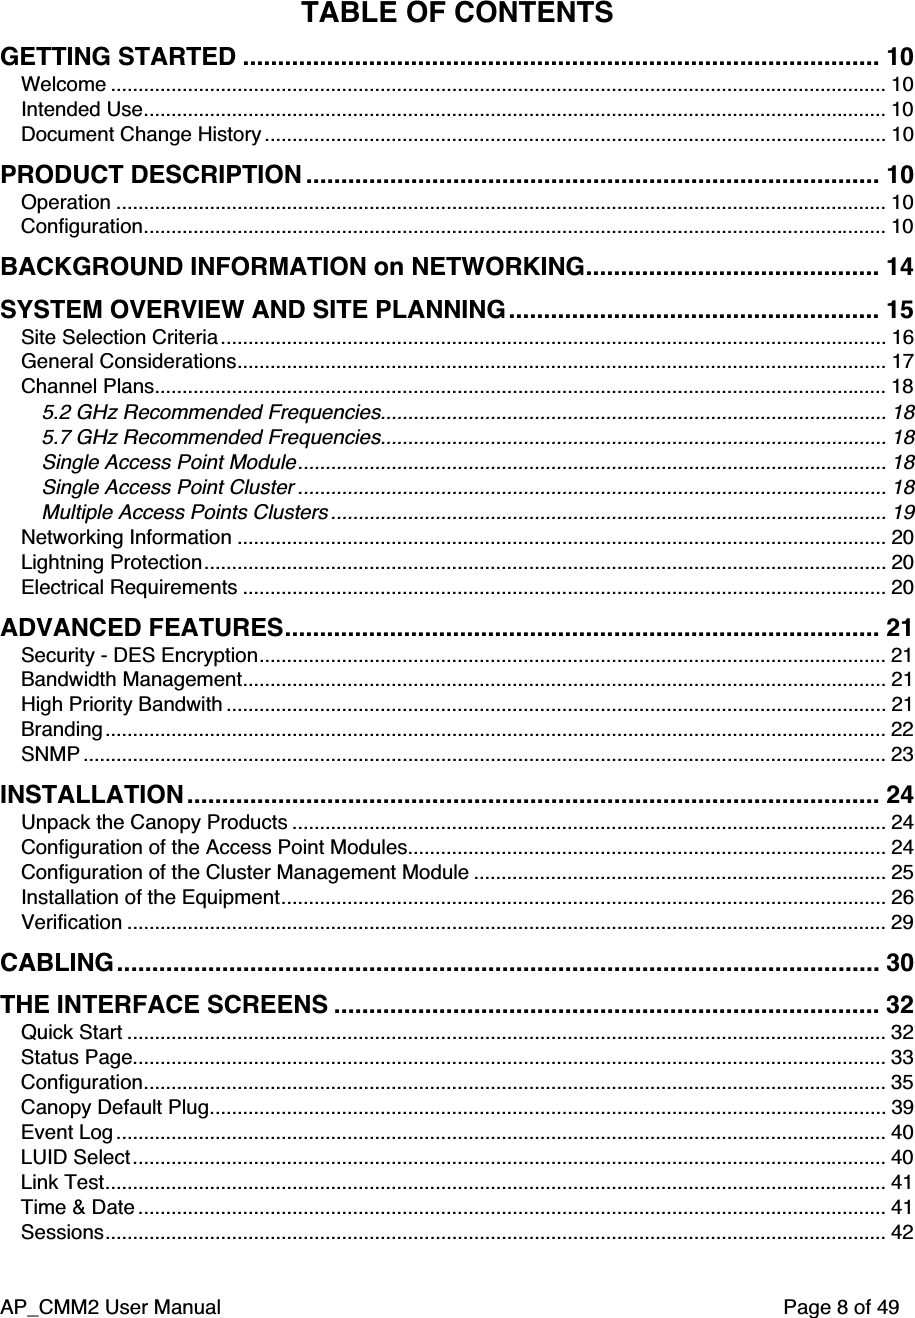 AP_CMM2 User Manual Page 8 of 49TABLE OF CONTENTSGETTING STARTED ........................................................................................... 10Welcome ............................................................................................................................................. 10Intended Use....................................................................................................................................... 10Document Change History ................................................................................................................. 10PRODUCT DESCRIPTION .................................................................................. 10Operation ............................................................................................................................................ 10Configuration....................................................................................................................................... 10BACKGROUND INFORMATION on NETWORKING.......................................... 14SYSTEM OVERVIEW AND SITE PLANNING ..................................................... 15Site Selection Criteria......................................................................................................................... 16General Considerations...................................................................................................................... 17Channel Plans..................................................................................................................................... 185.2 GHz Recommended Frequencies............................................................................................ 185.7 GHz Recommended Frequencies............................................................................................ 18Single Access Point Module........................................................................................................... 18Single Access Point Cluster ........................................................................................................... 18Multiple Access Points Clusters ..................................................................................................... 19Networking Information ...................................................................................................................... 20Lightning Protection............................................................................................................................ 20Electrical Requirements ..................................................................................................................... 20ADVANCED FEATURES..................................................................................... 21Security - DES Encryption.................................................................................................................. 21Bandwidth Management..................................................................................................................... 21High Priority Bandwith ........................................................................................................................ 21Branding.............................................................................................................................................. 22SNMP .................................................................................................................................................. 23INSTALLATION ................................................................................................... 24Unpack the Canopy Products ............................................................................................................ 24Configuration of the Access Point Modules....................................................................................... 24Configuration of the Cluster Management Module ........................................................................... 25Installation of the Equipment.............................................................................................................. 26Verification .......................................................................................................................................... 29CABLING ............................................................................................................. 30THE INTERFACE SCREENS .............................................................................. 32Quick Start .......................................................................................................................................... 32Status Page......................................................................................................................................... 33Configuration....................................................................................................................................... 35Canopy Default Plug........................................................................................................................... 39Event Log ............................................................................................................................................ 40LUID Select......................................................................................................................................... 40Link Test.............................................................................................................................................. 41Time &amp; Date ........................................................................................................................................ 41Sessions.............................................................................................................................................. 42